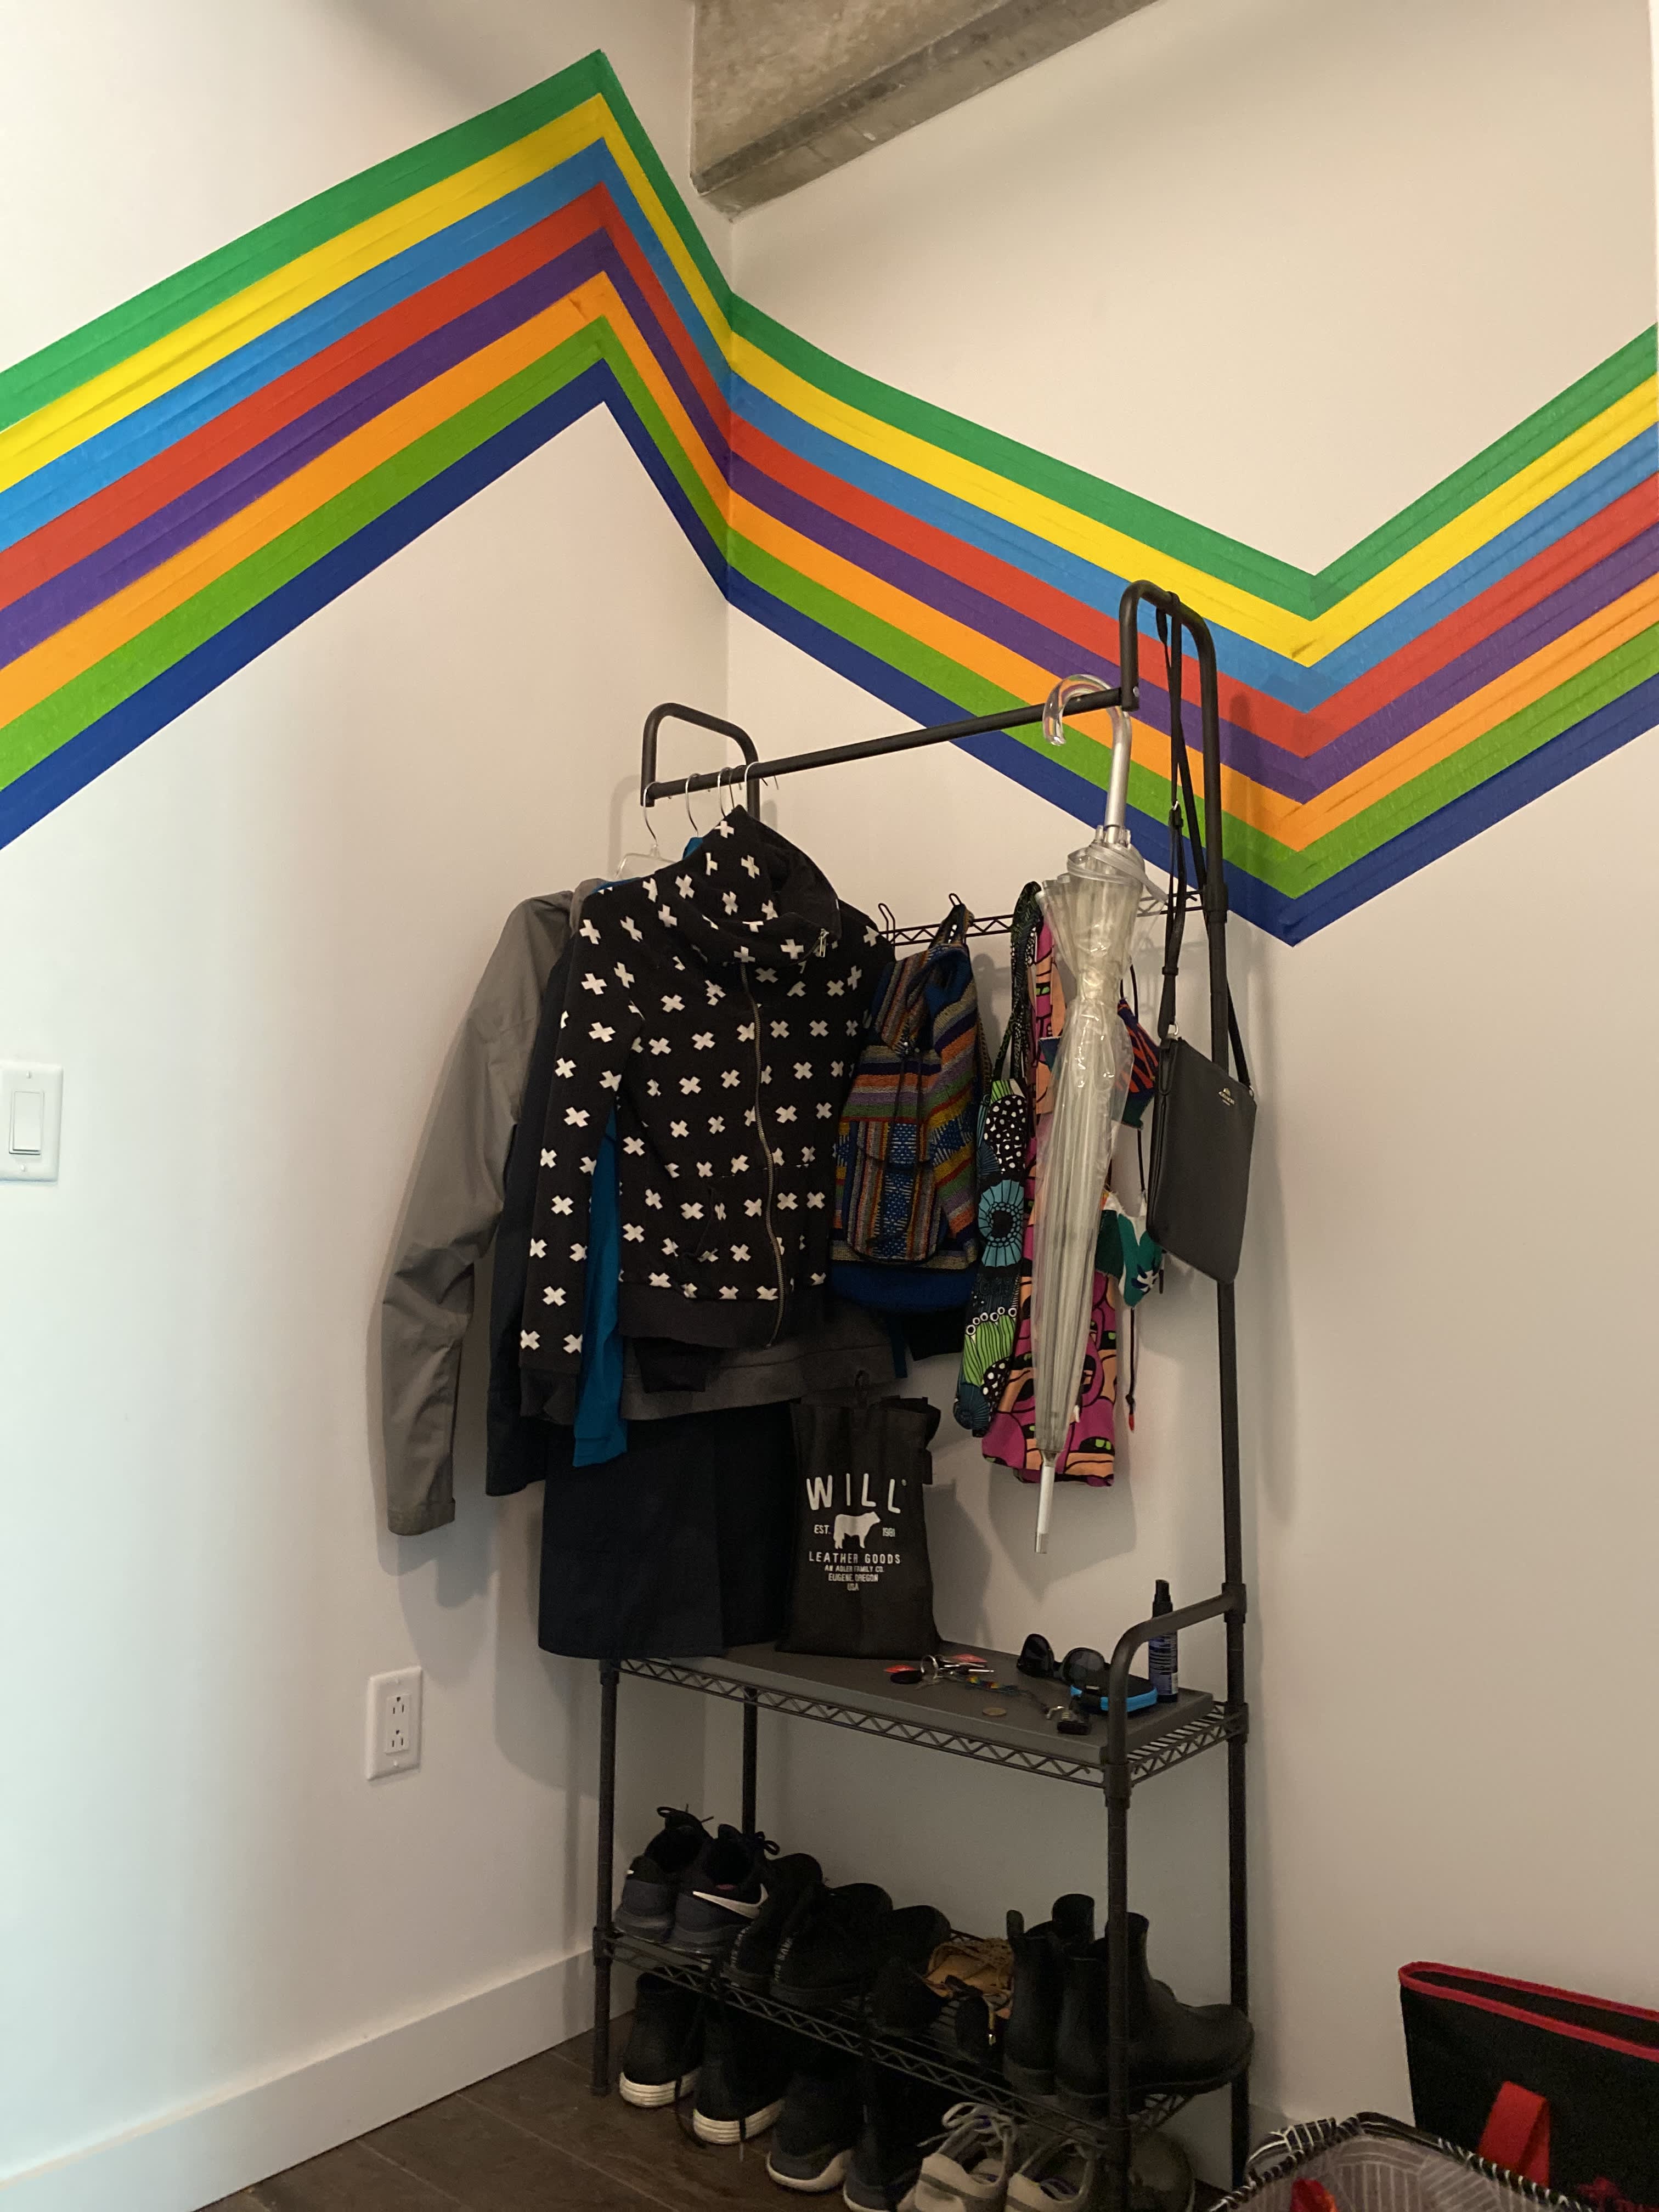 Create a DIY Mural with Tape: 2 Ways! - Pro Tapes®